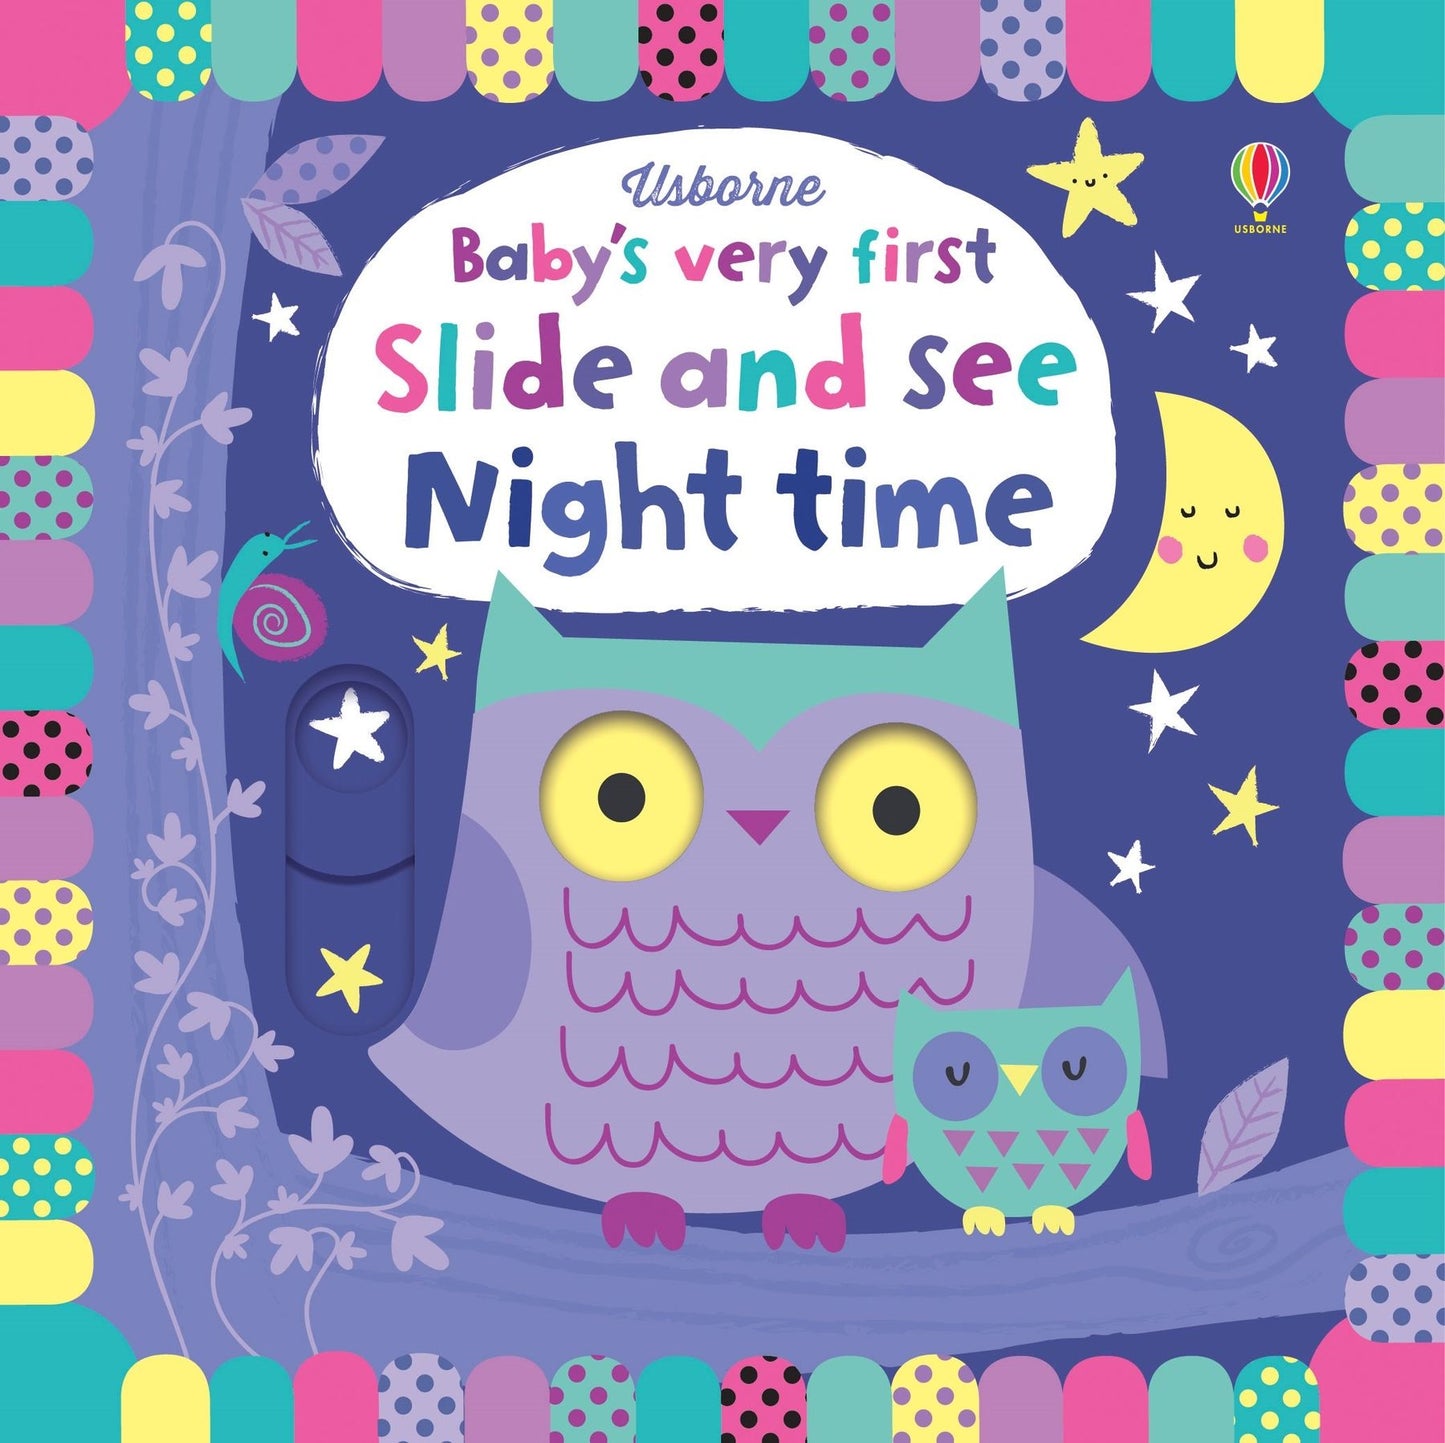 Usborne Baby's Very First Slide and See Night time